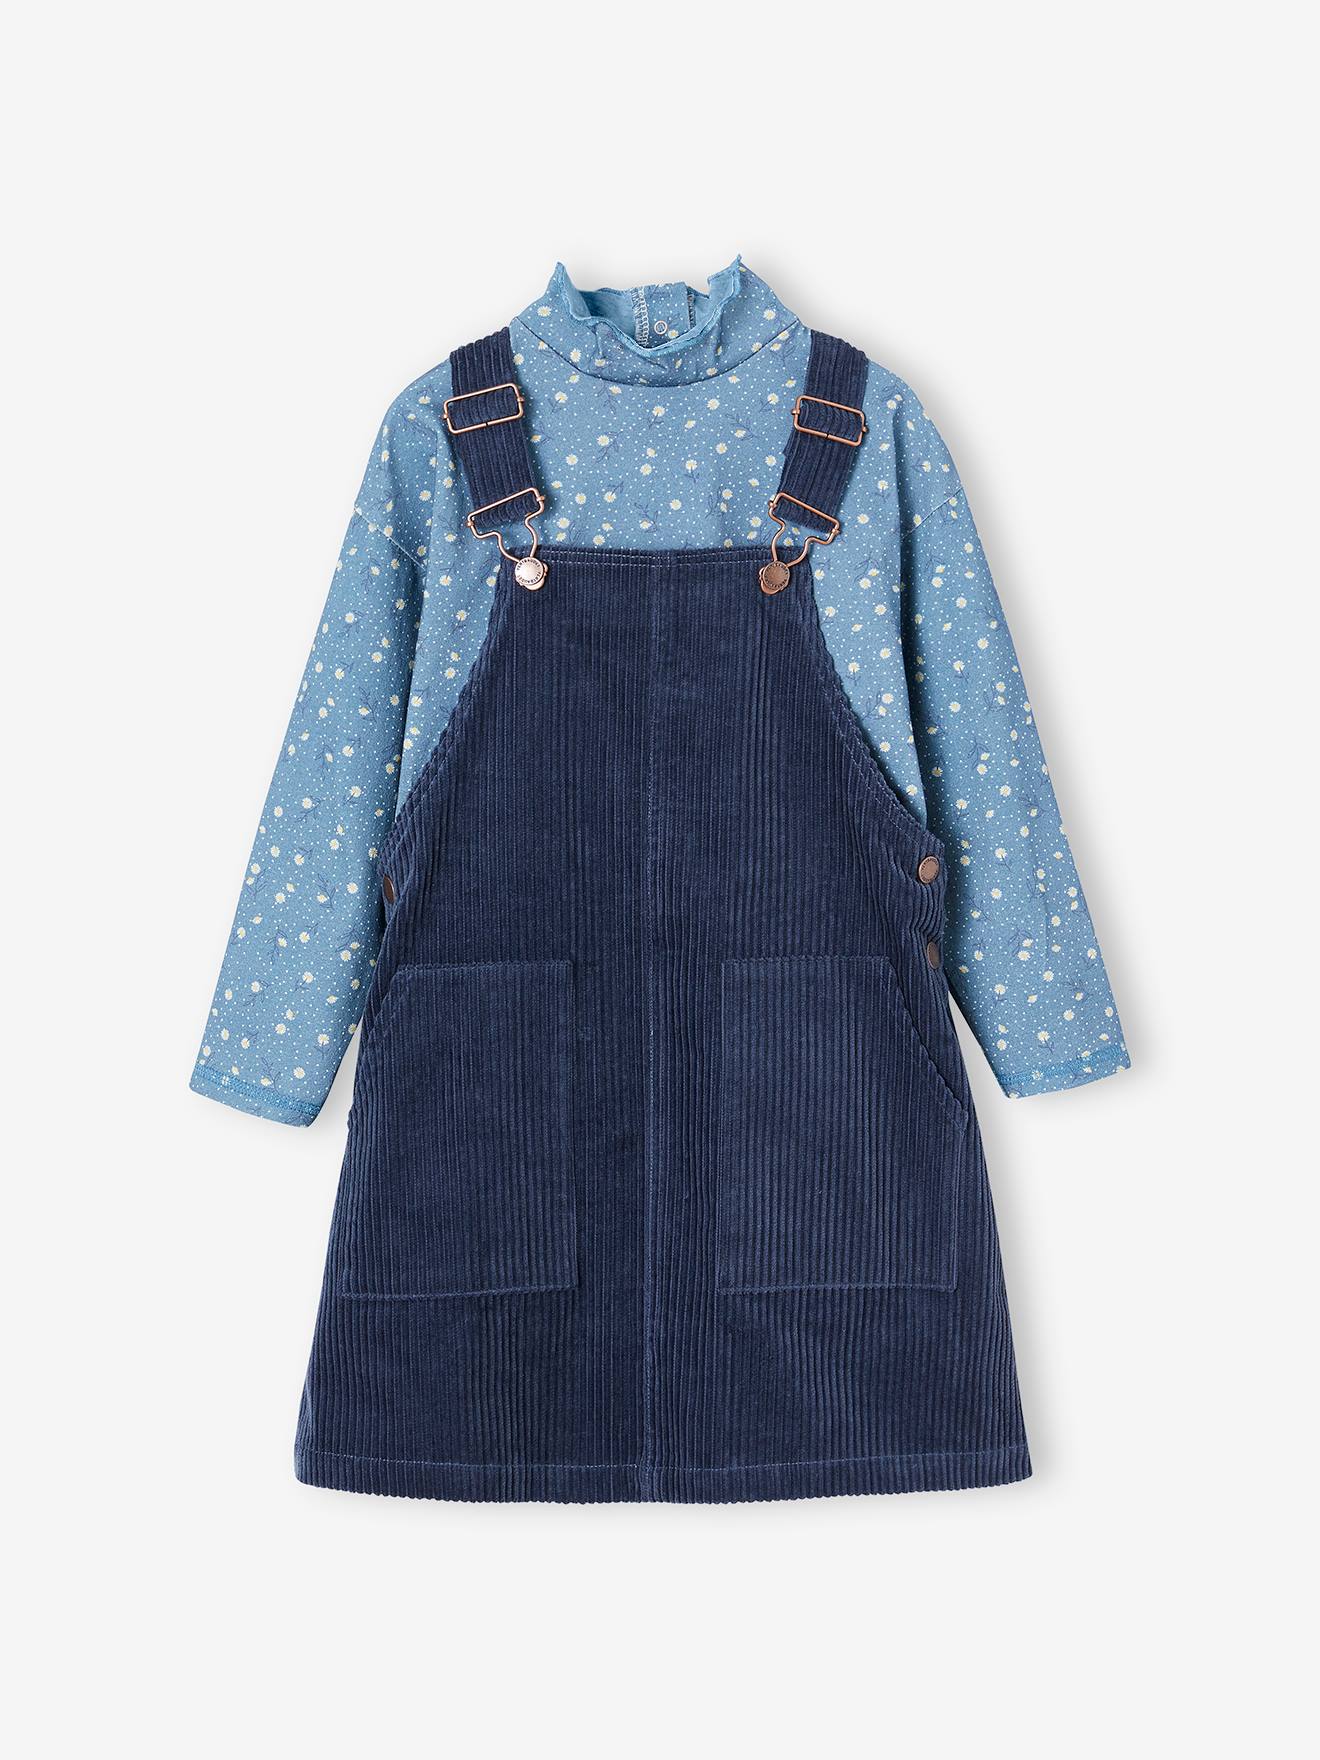 Top + Corduroy Dungaree Dress Outfit for Girls - night blue